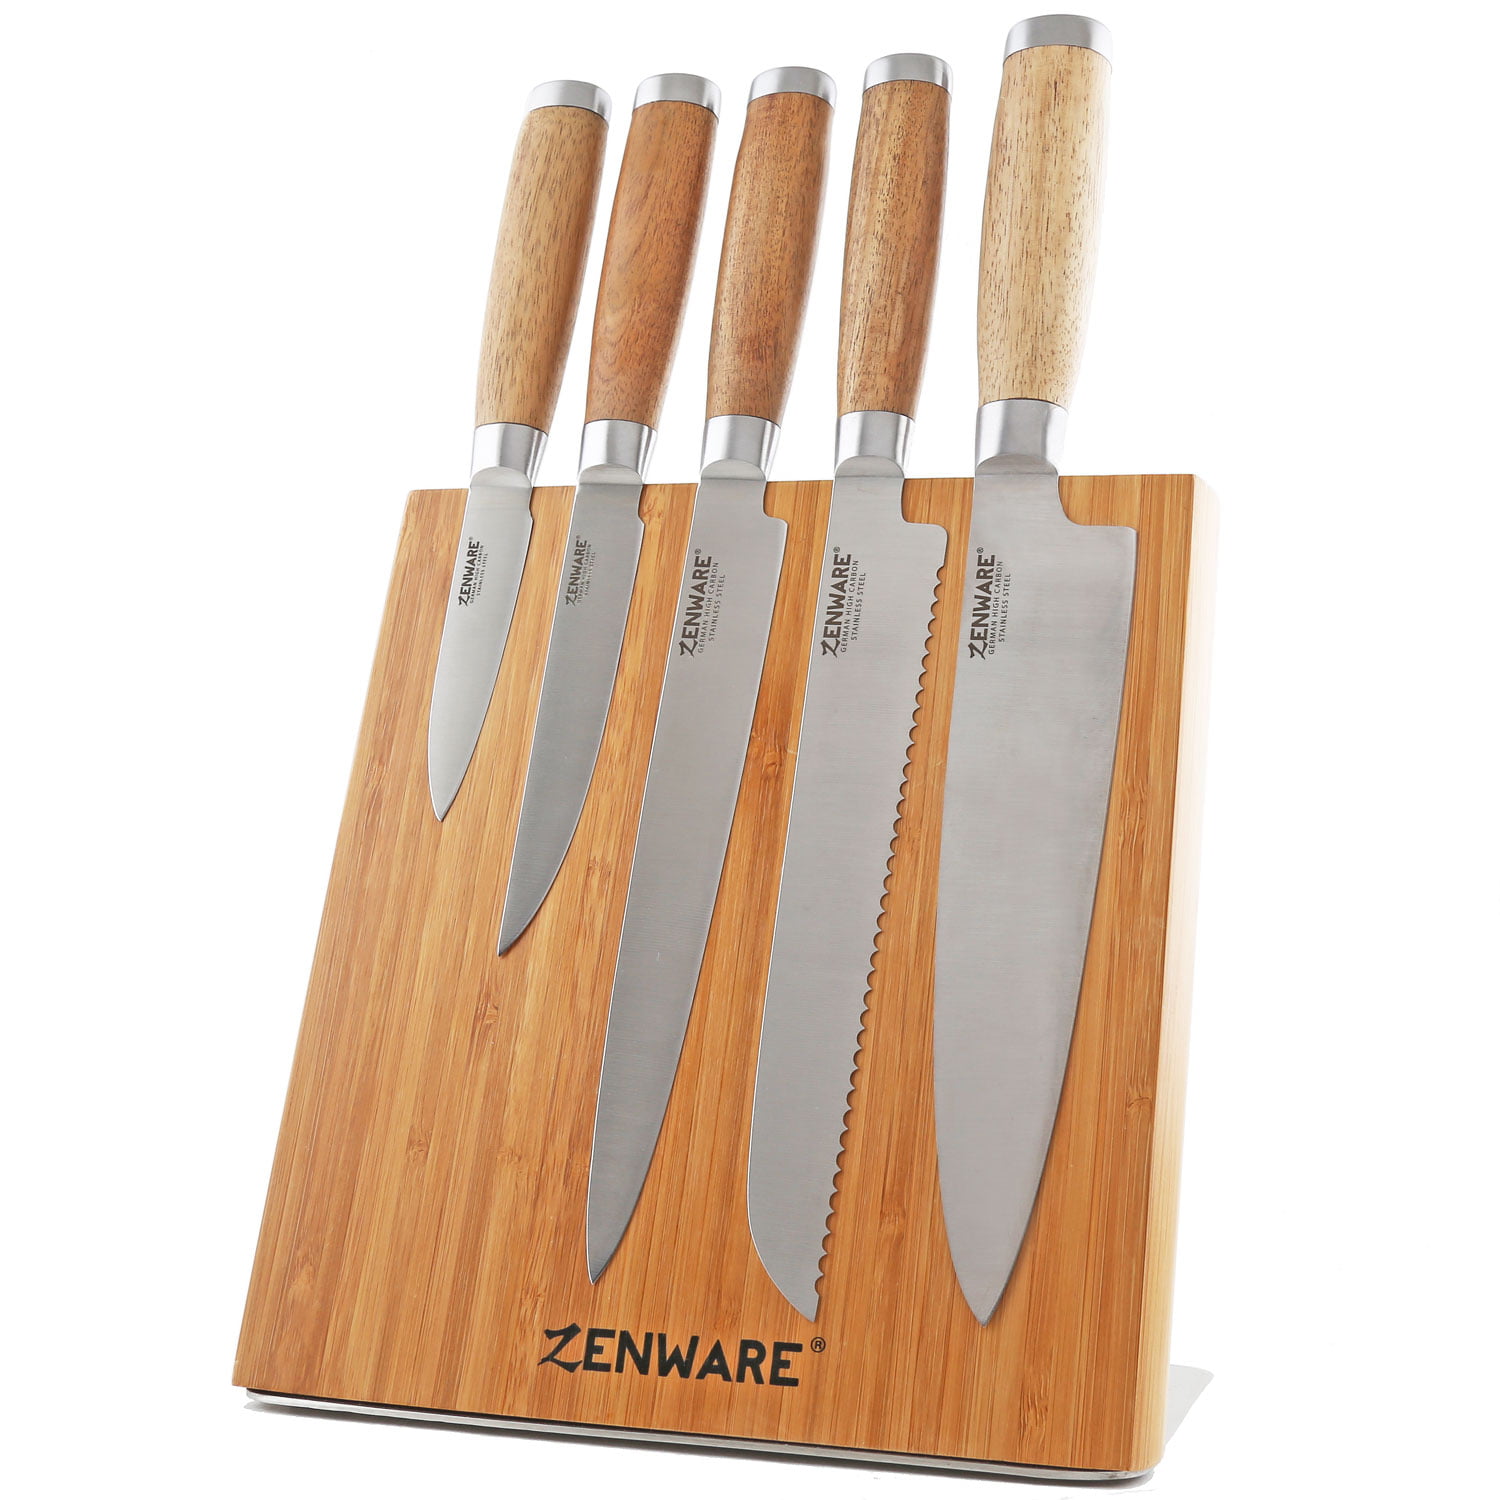 AOKEDA 16-Piece Kitchen Knife Set with Block, High Carbon German Steel,  with Sharpener and Kitchen Shears (Natural Wenge)